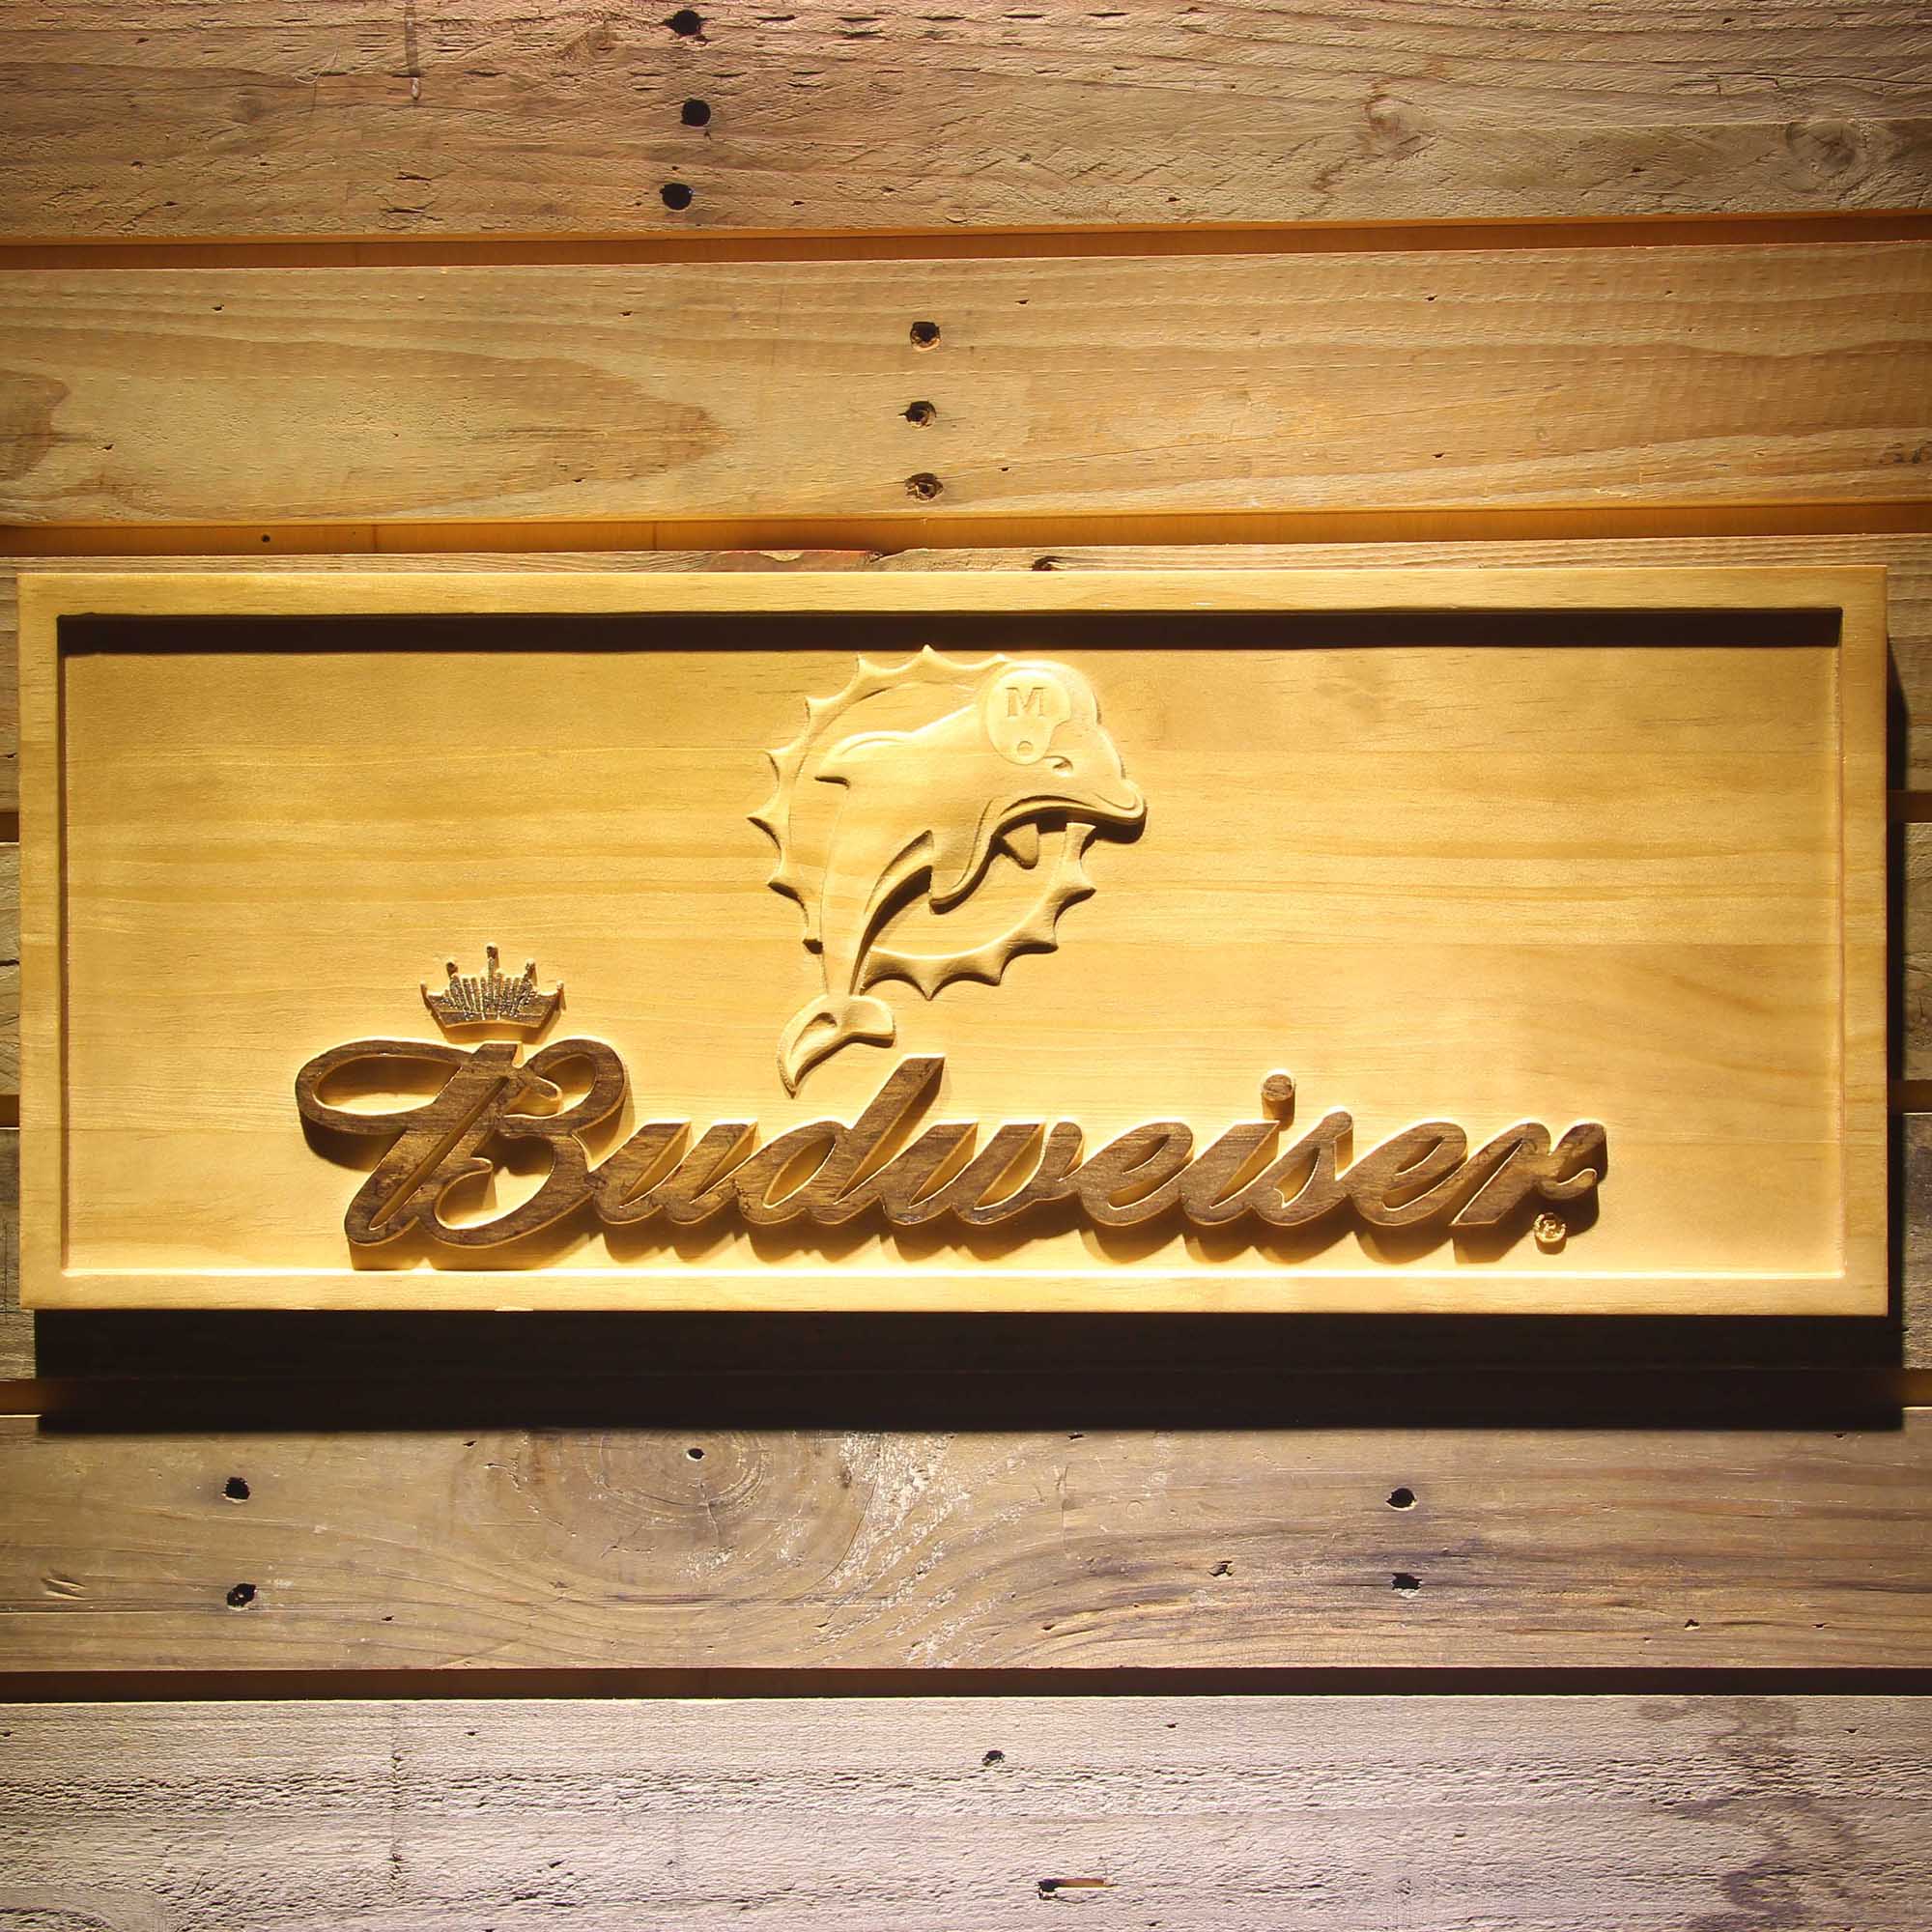 Miami Dolphins Budweiser 3D Solid Wooden Craving Sign